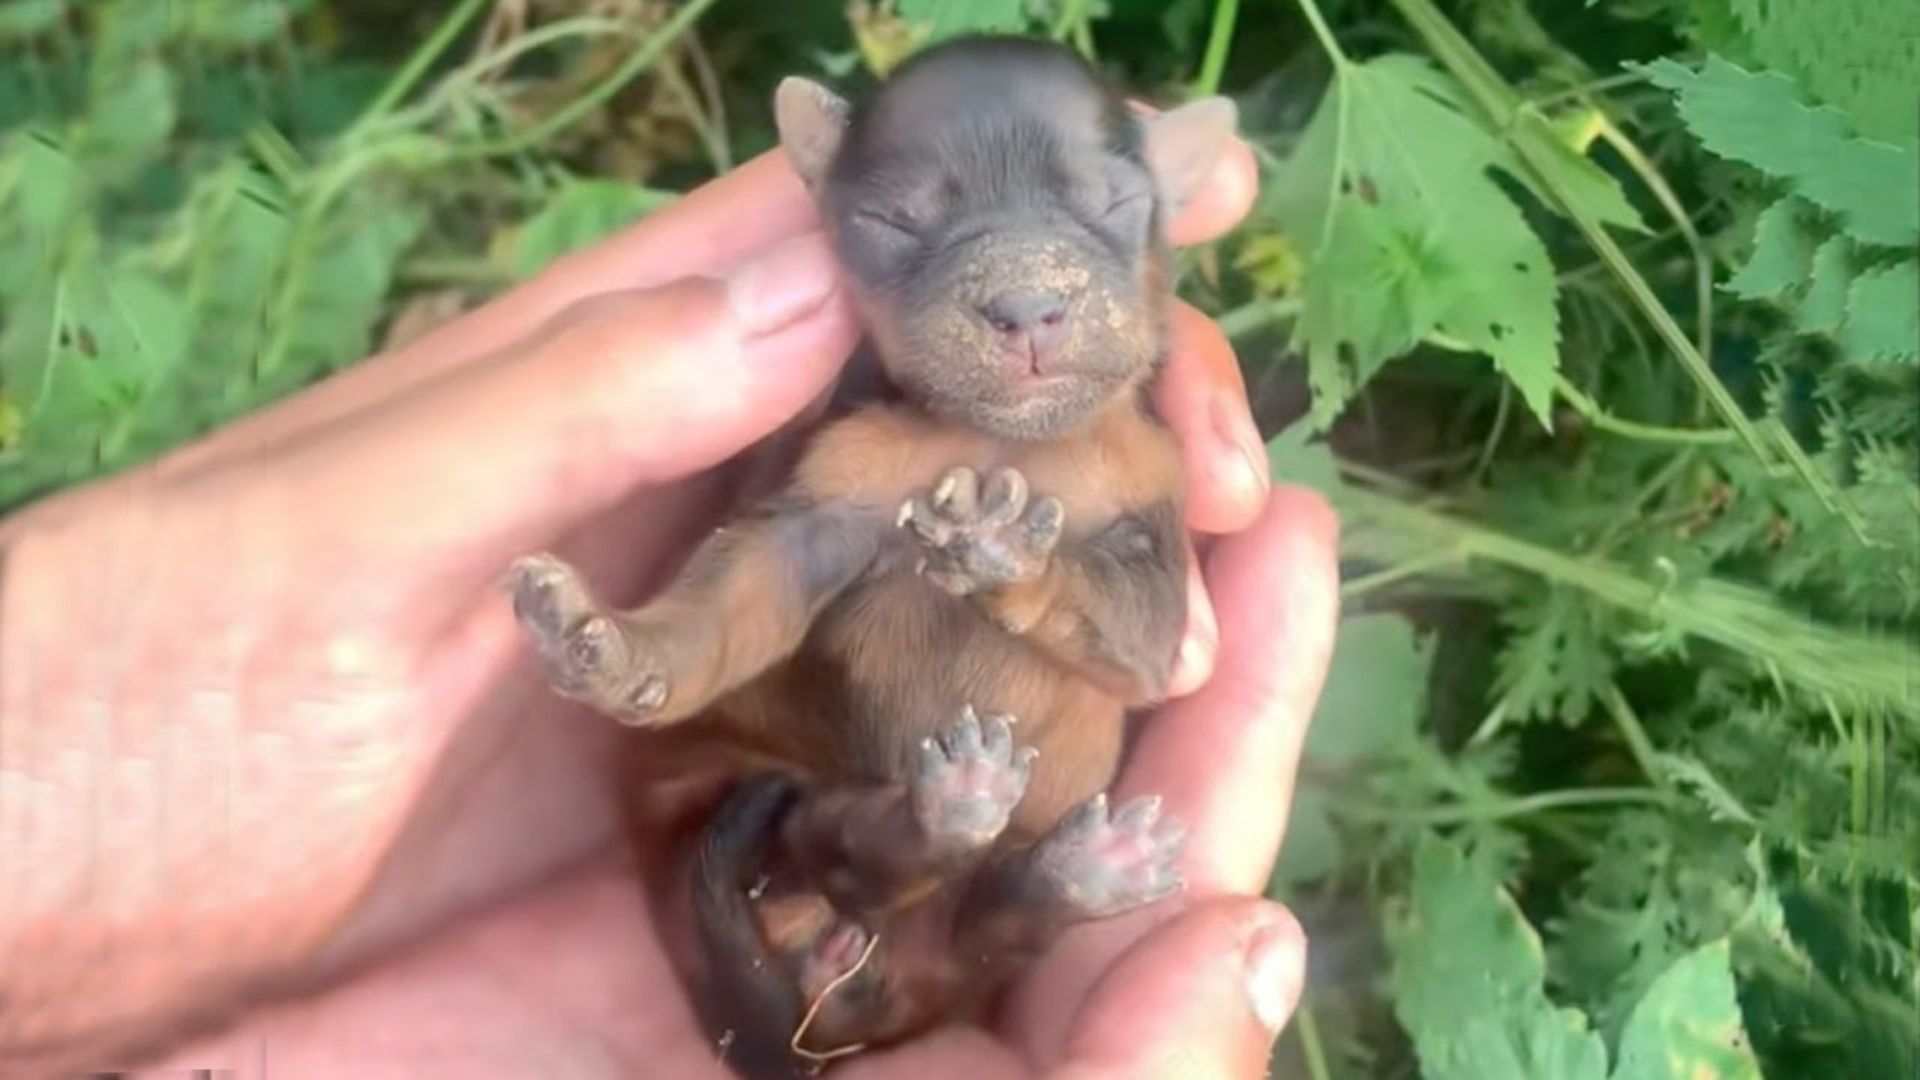 Newborn Puppy Found Lying Helplessly In Bushes, Desperately Crying For Its Mom